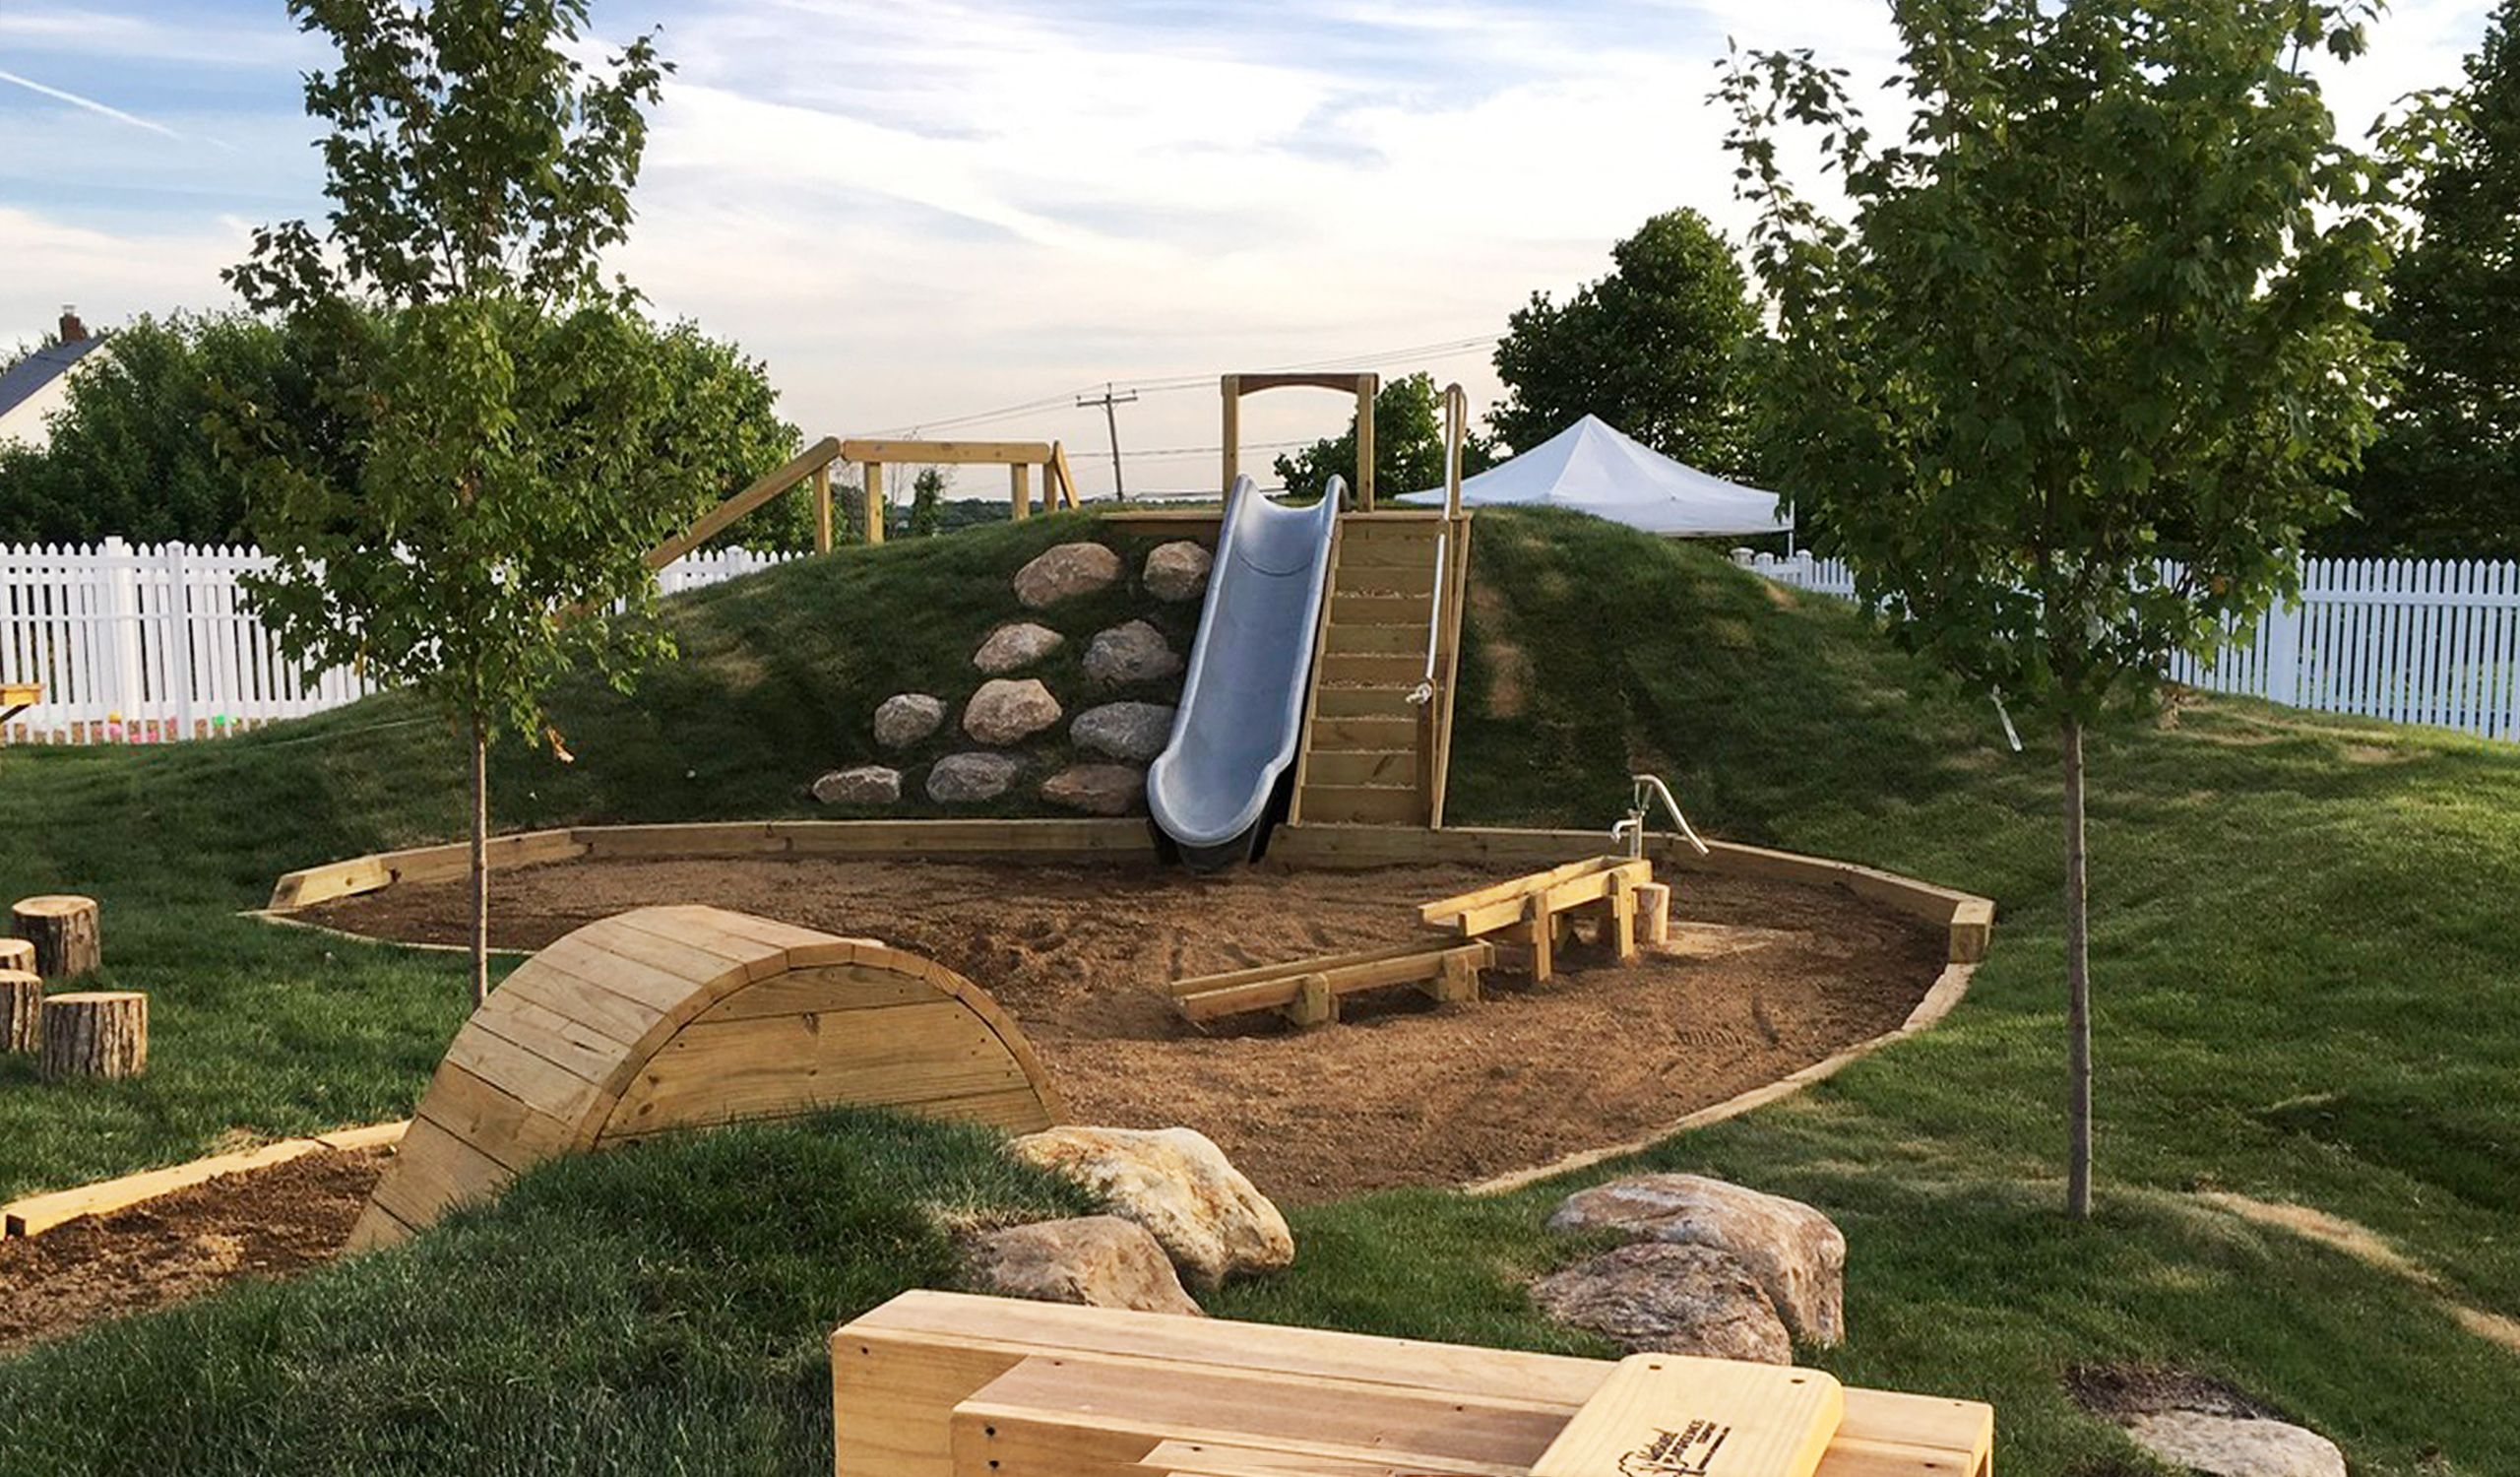 Natural Playgrounds Store